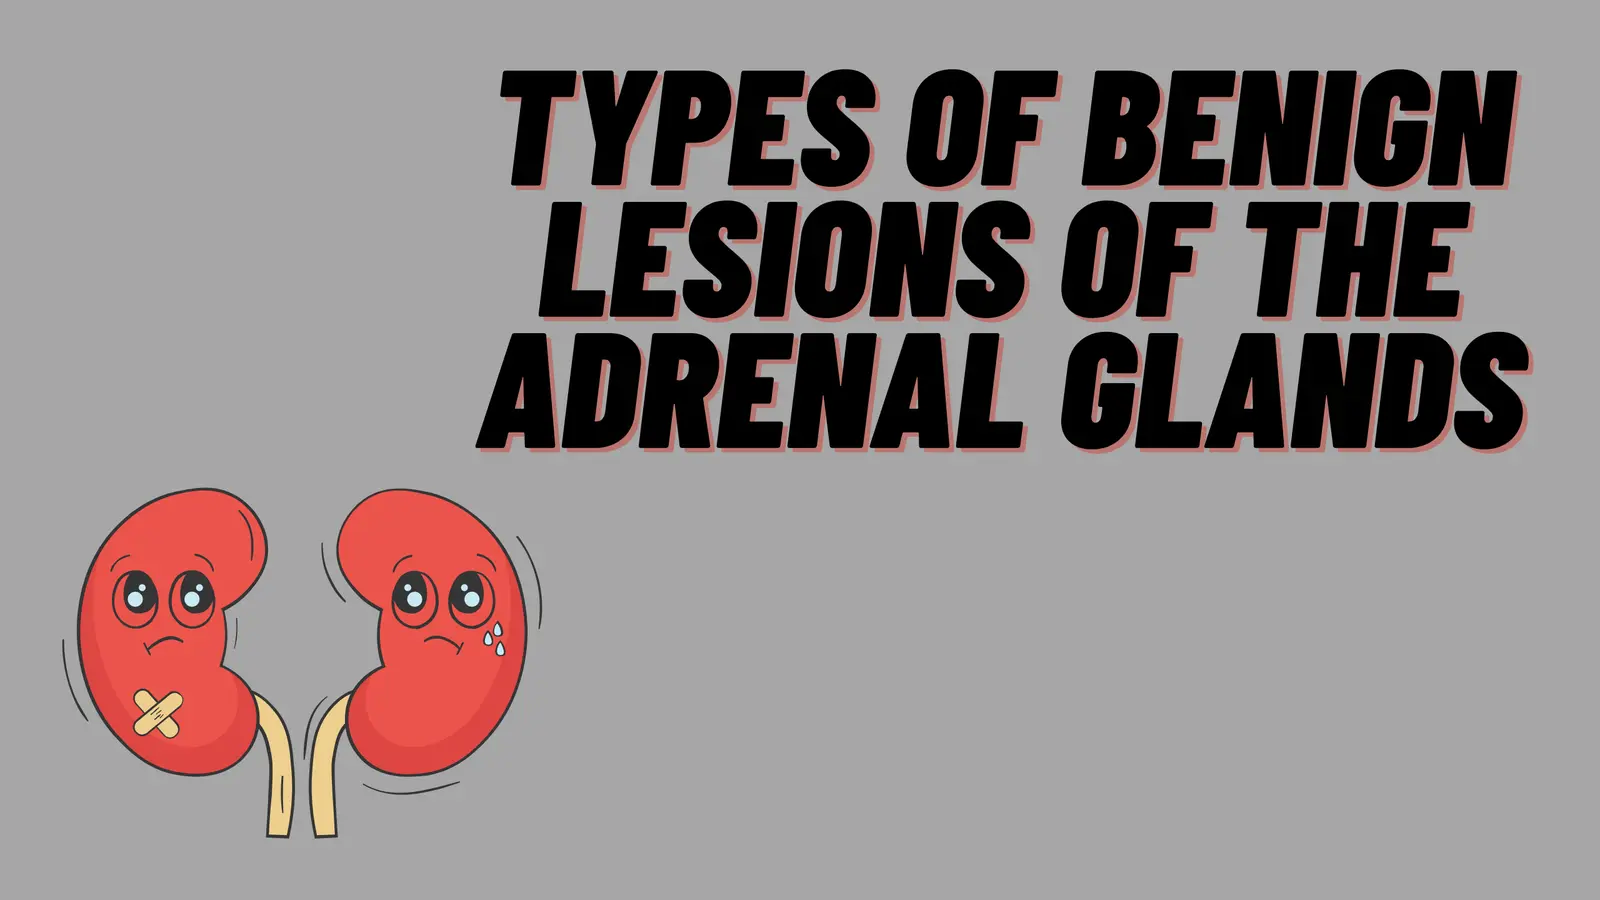 Benign Lesions of the Adrenal Glands